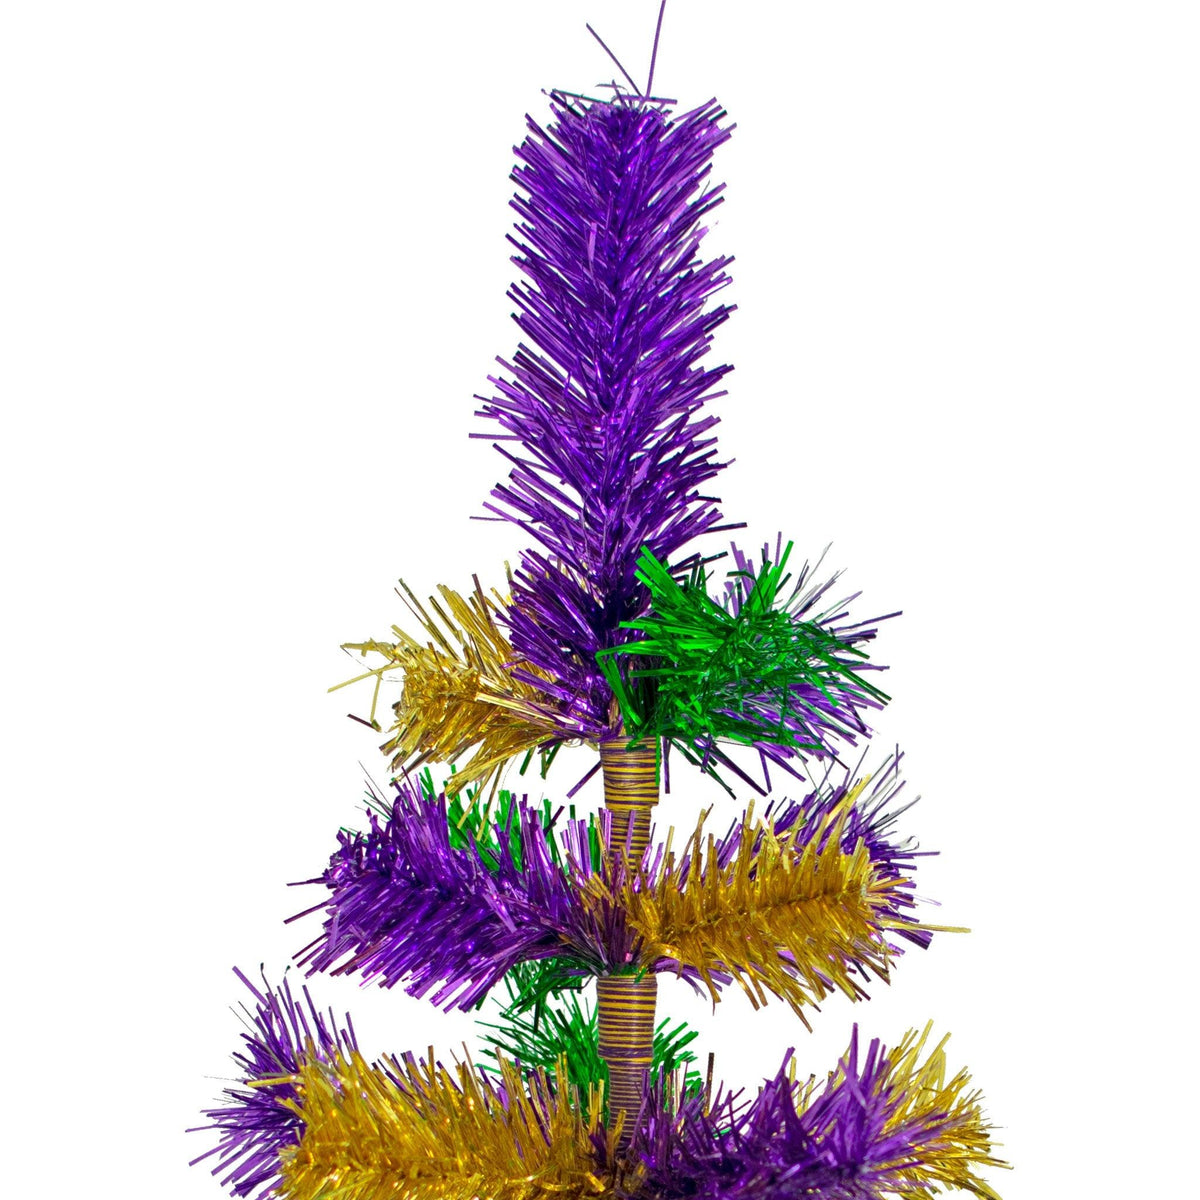 Mardi Gras Themed Tinsel Christmas Tree Mixed Brush Branches Holiday Decor  Trees (36in)